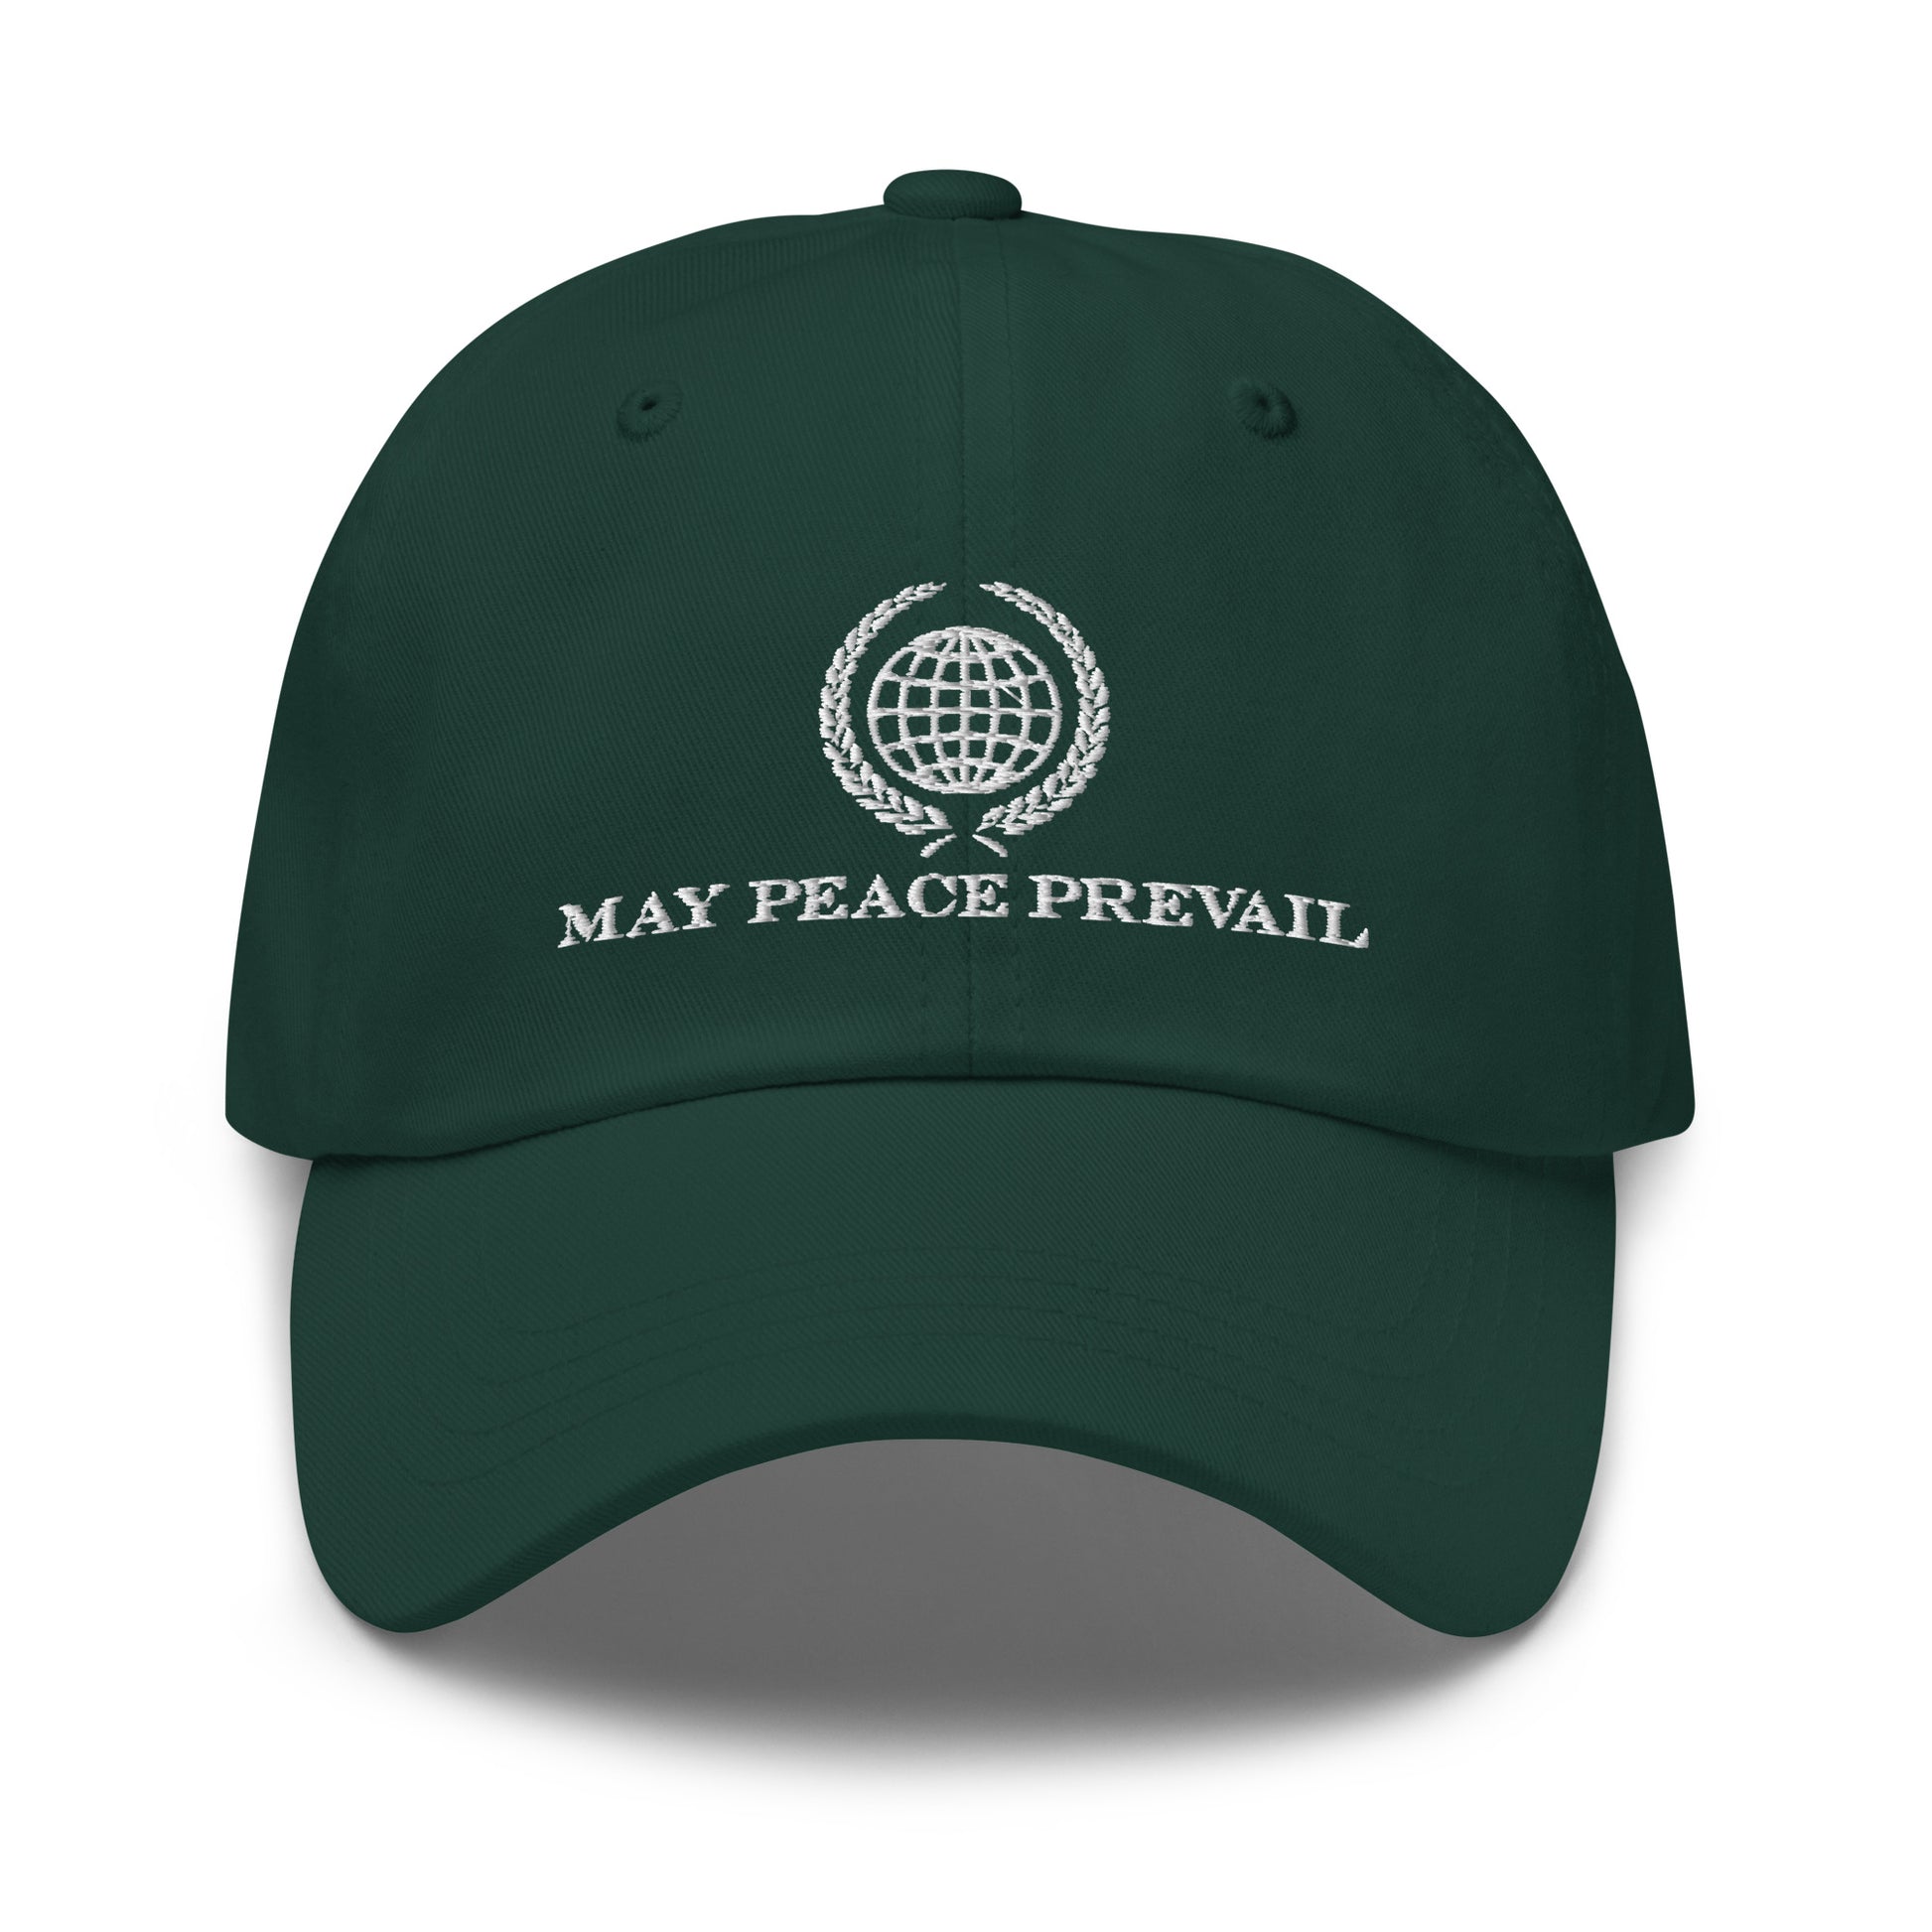 premium peace hat - May peace prevail embroidered premium dad hat - Peace hat - global peace hat